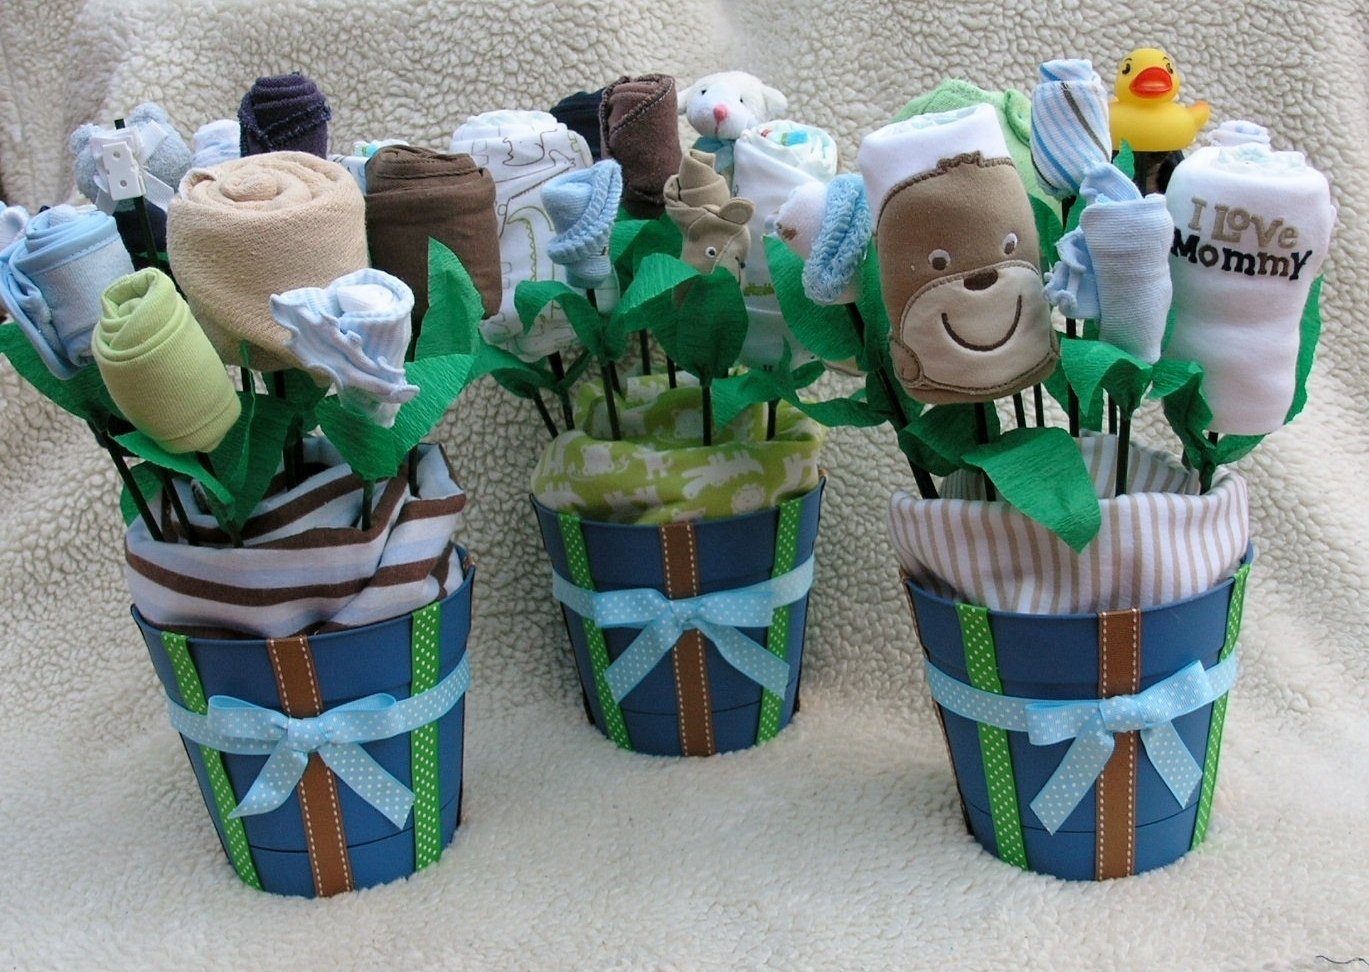 10 Unique Baby Shower Centerpiece Ideas Homemade baby shower ideas for boy magnificent uk diy pinterest theme and a 2022